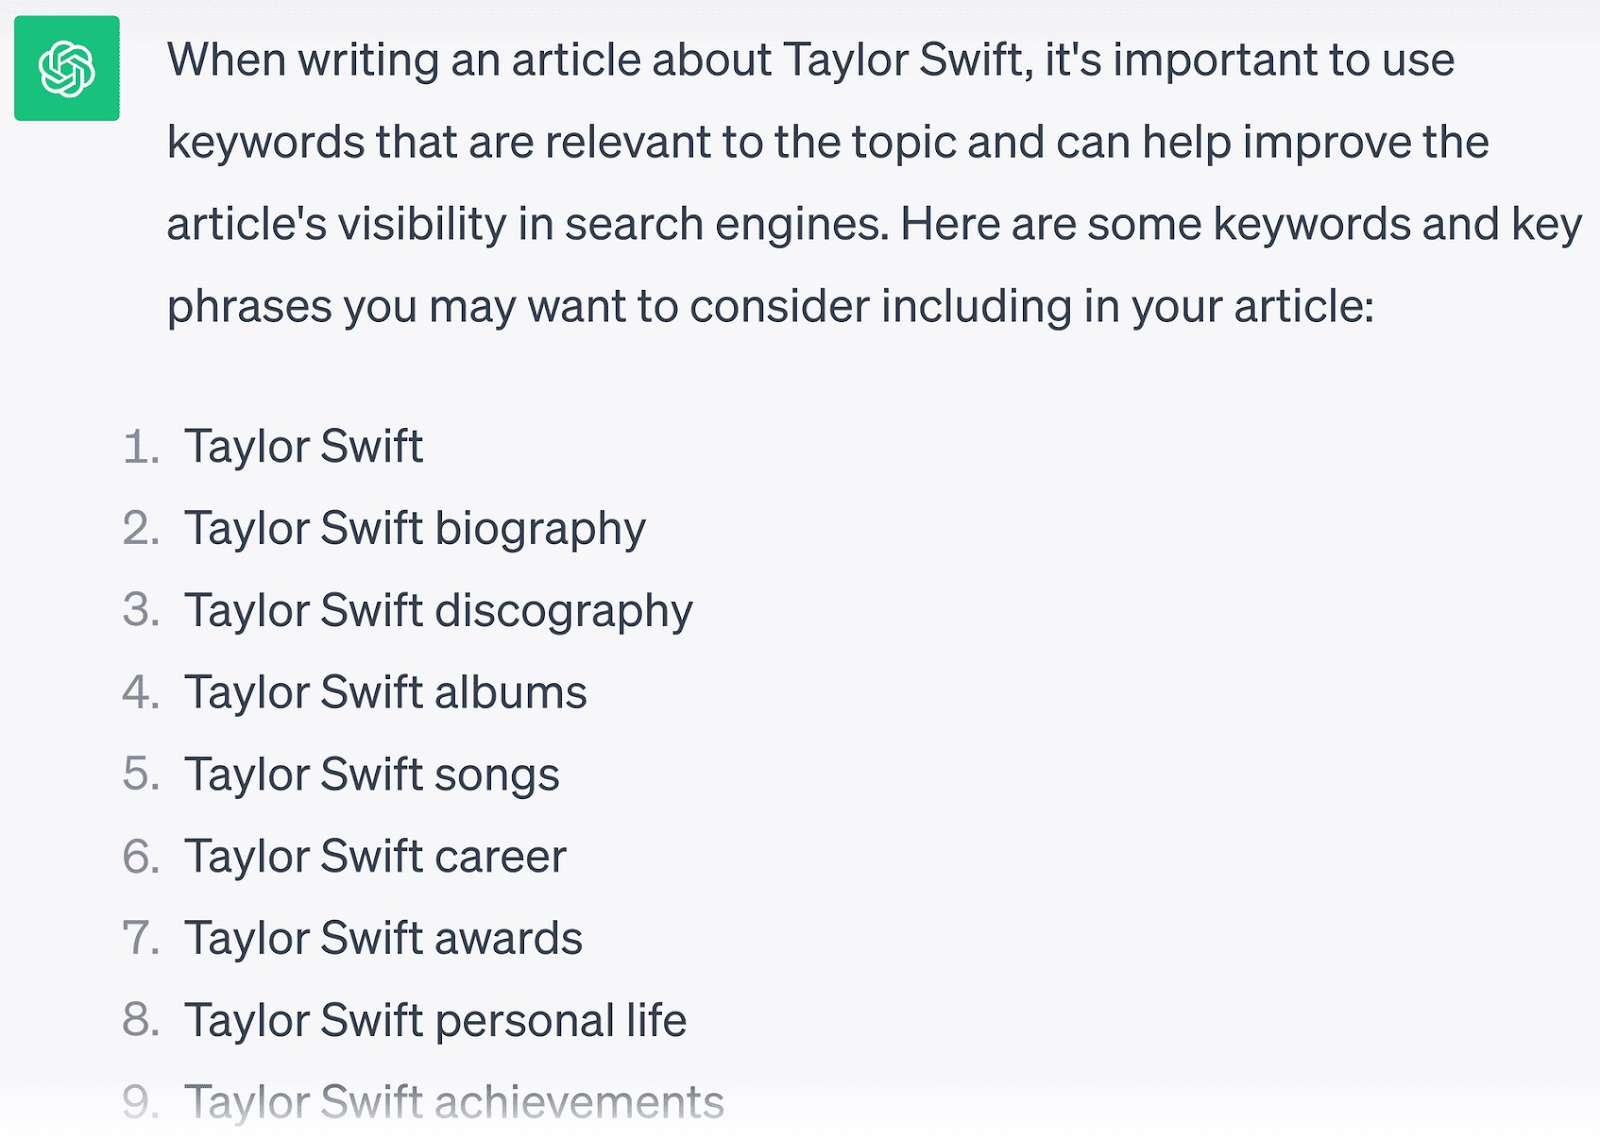 ChatGPT response to “What keywords should I use in an article about Taylor Swift?” prompt